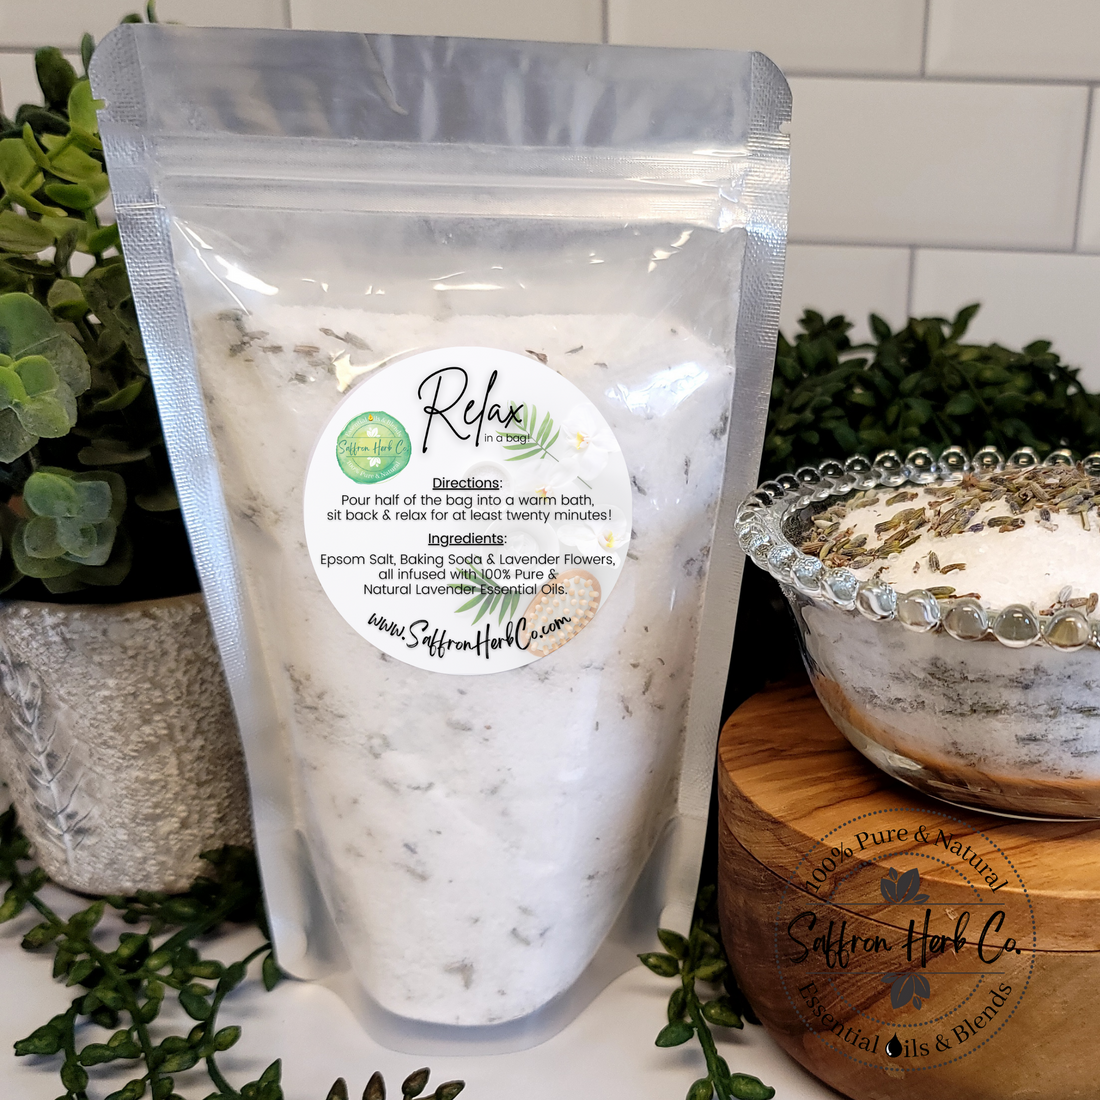 What Makes Our Relax in a Bag Lavender Infused Epsom Salts So Special?